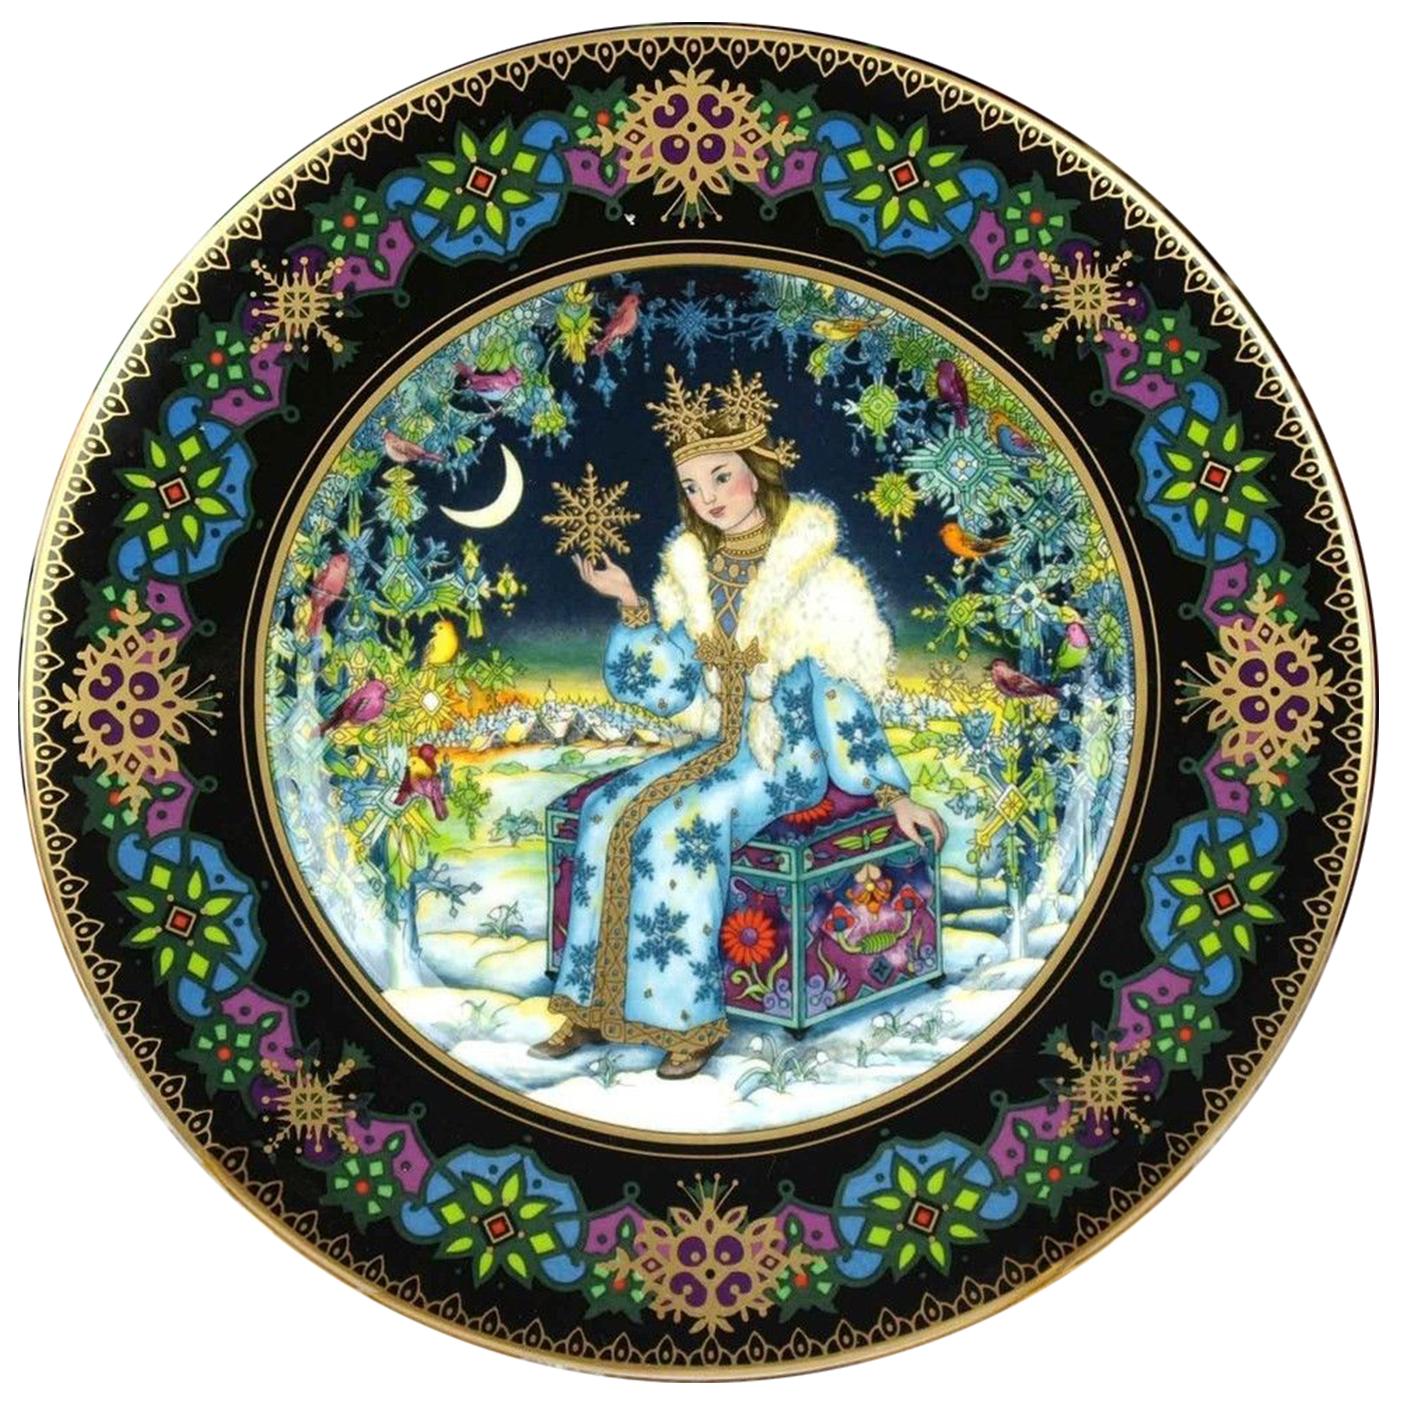 Stunning an rare Villeroy & Boch limited edition collectors plates from Heinrich Porsellan illustrated by Gere Frauth. 

The size of each plates is 8-1/2